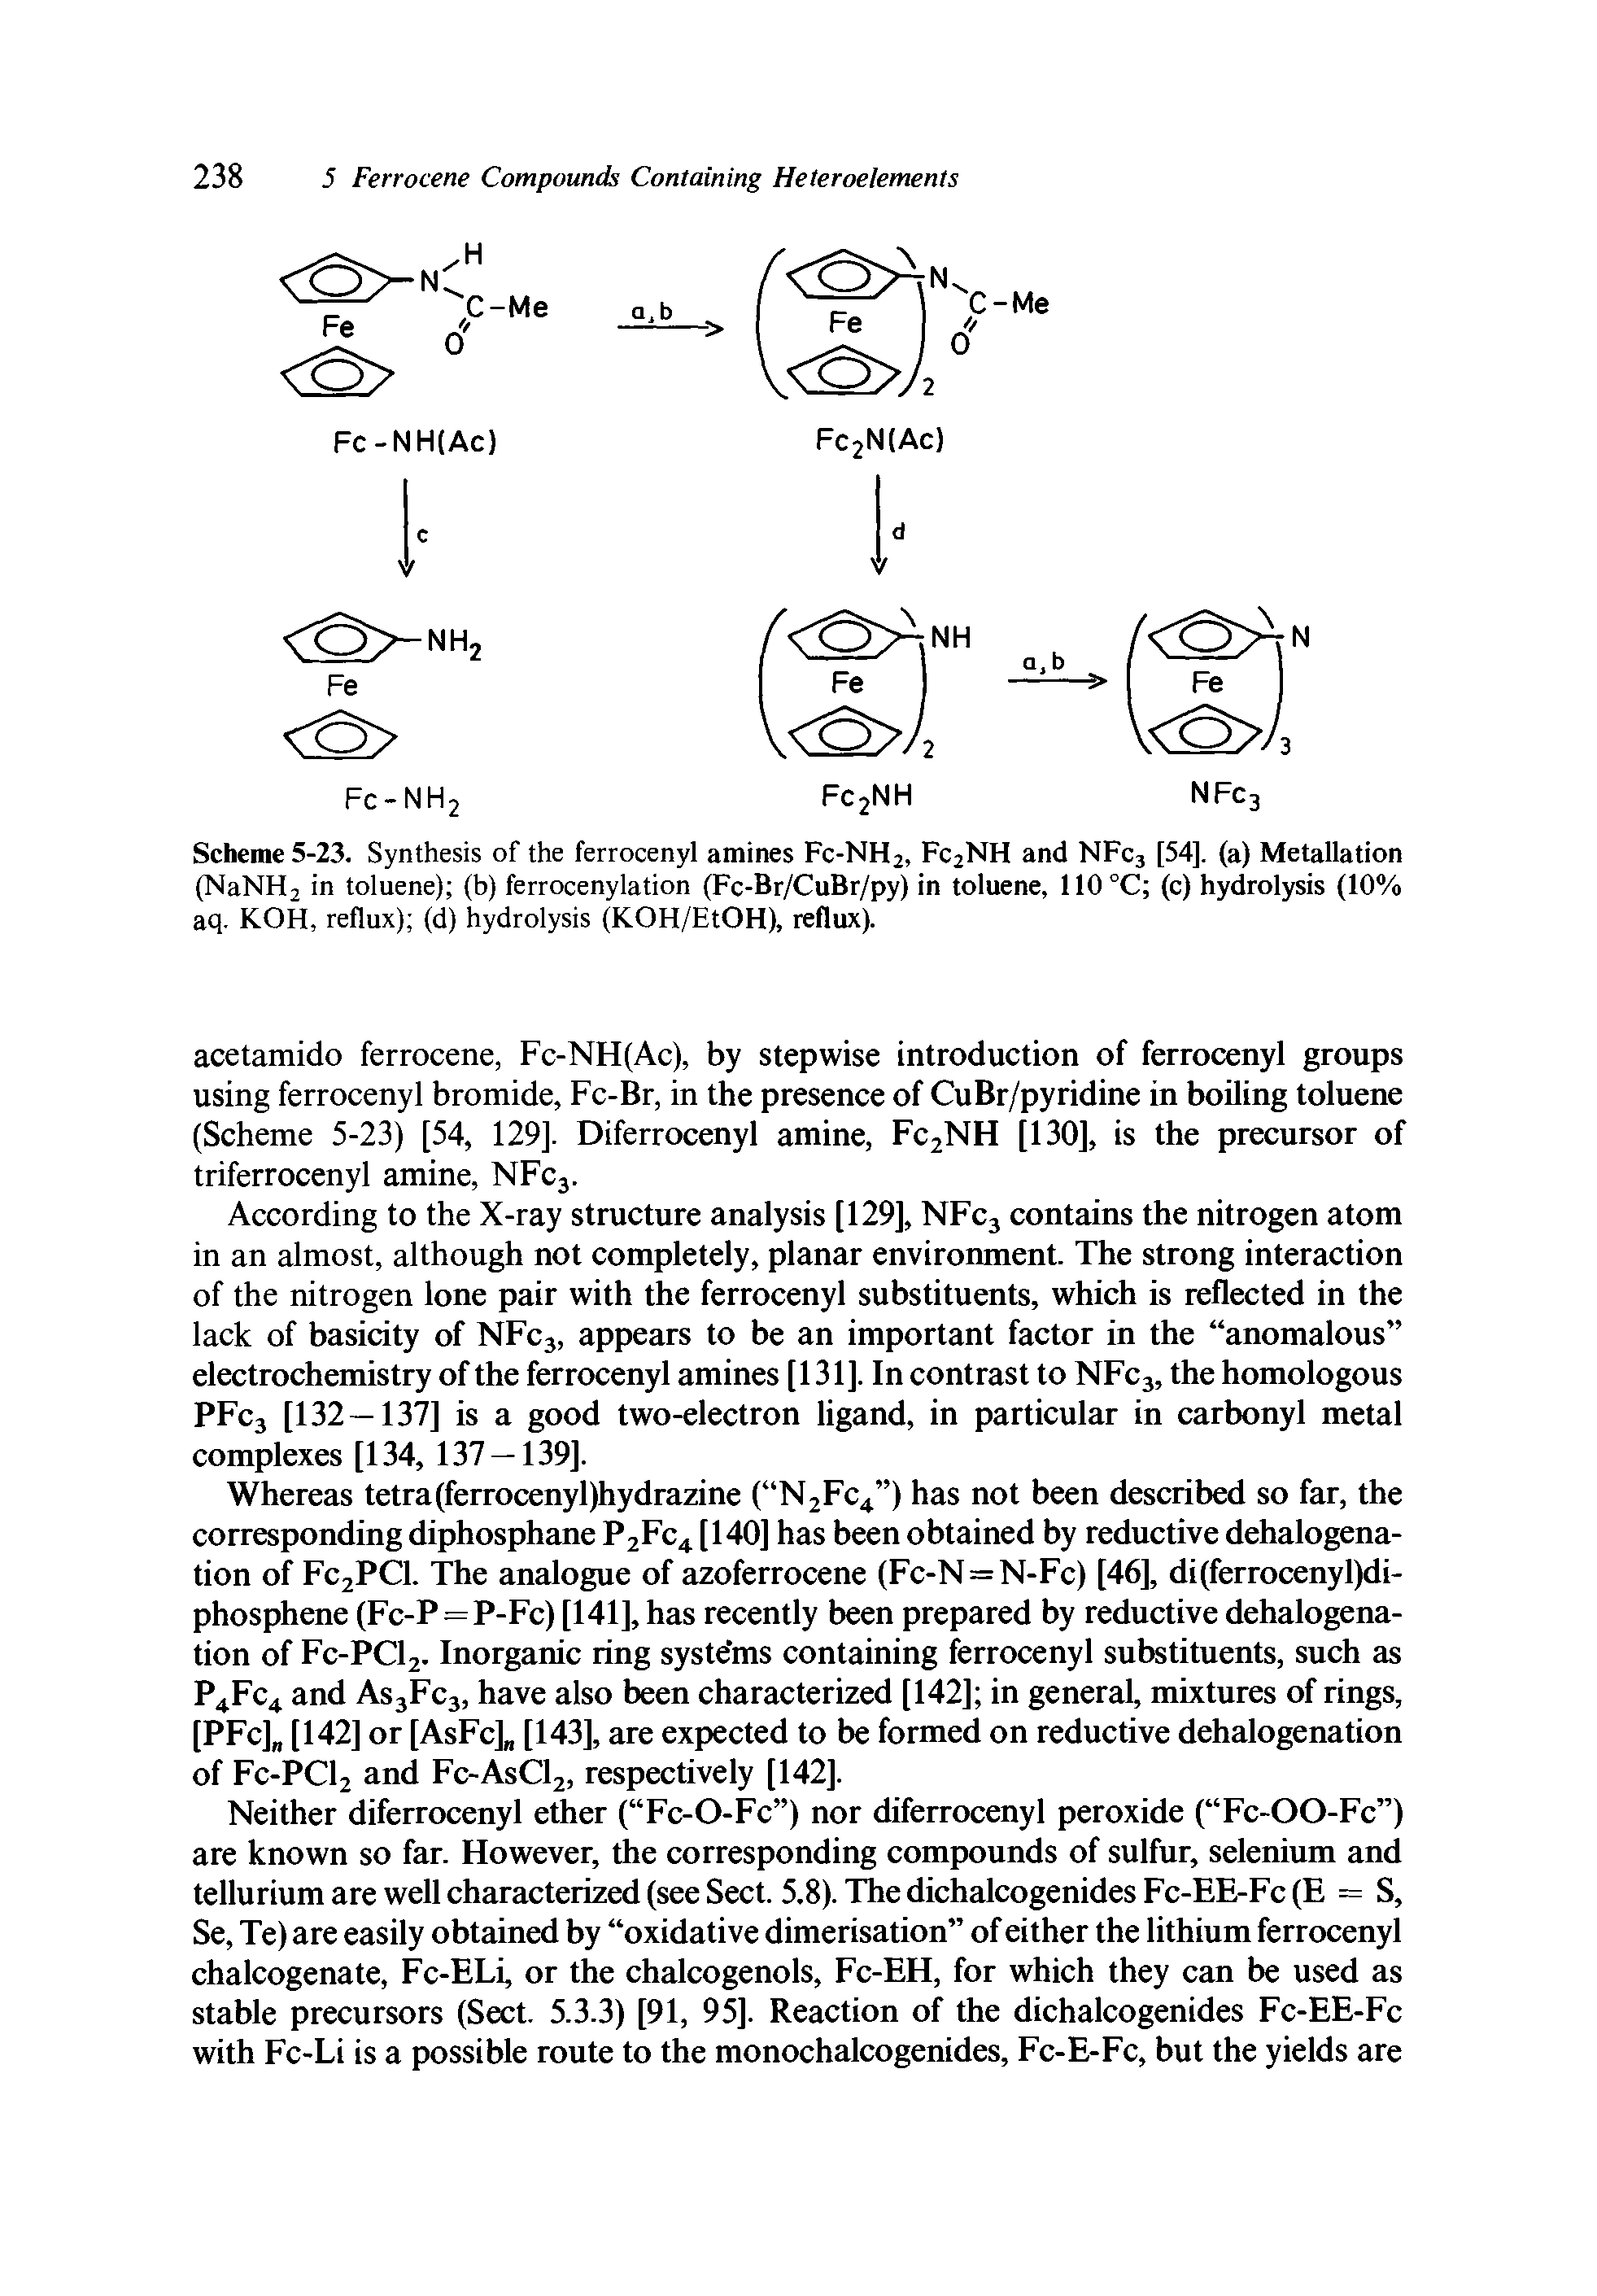 Scheme 5-23. Synthesis of the ferrocenyl amines Fc-NHa, FcaNH and NFcj [54], (a) Metallation (NaNH2 in toluene) (b) ferrocenylation (Fc-Br/CuBr/py) in toluene, 110°C (c) hydrolysis (10% aq. KOH, reflux) (d) hydrolysis (KOH/EtOH), reflux).